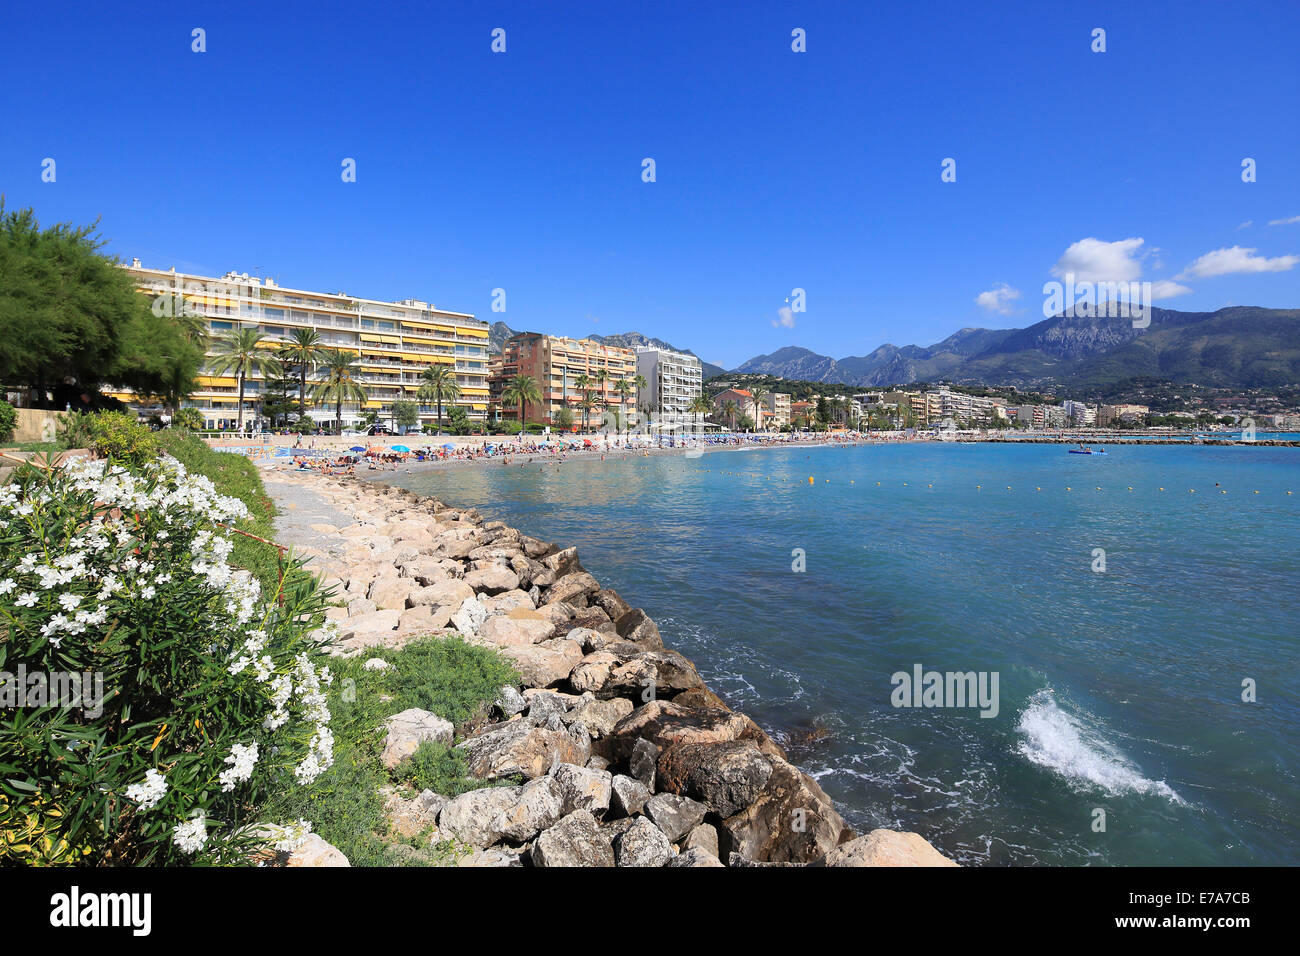 Beach of Carnolès, looking towards the ridge of the border to Italy, Roquebrune Cap Martin, Maritime Alps Stock Photo